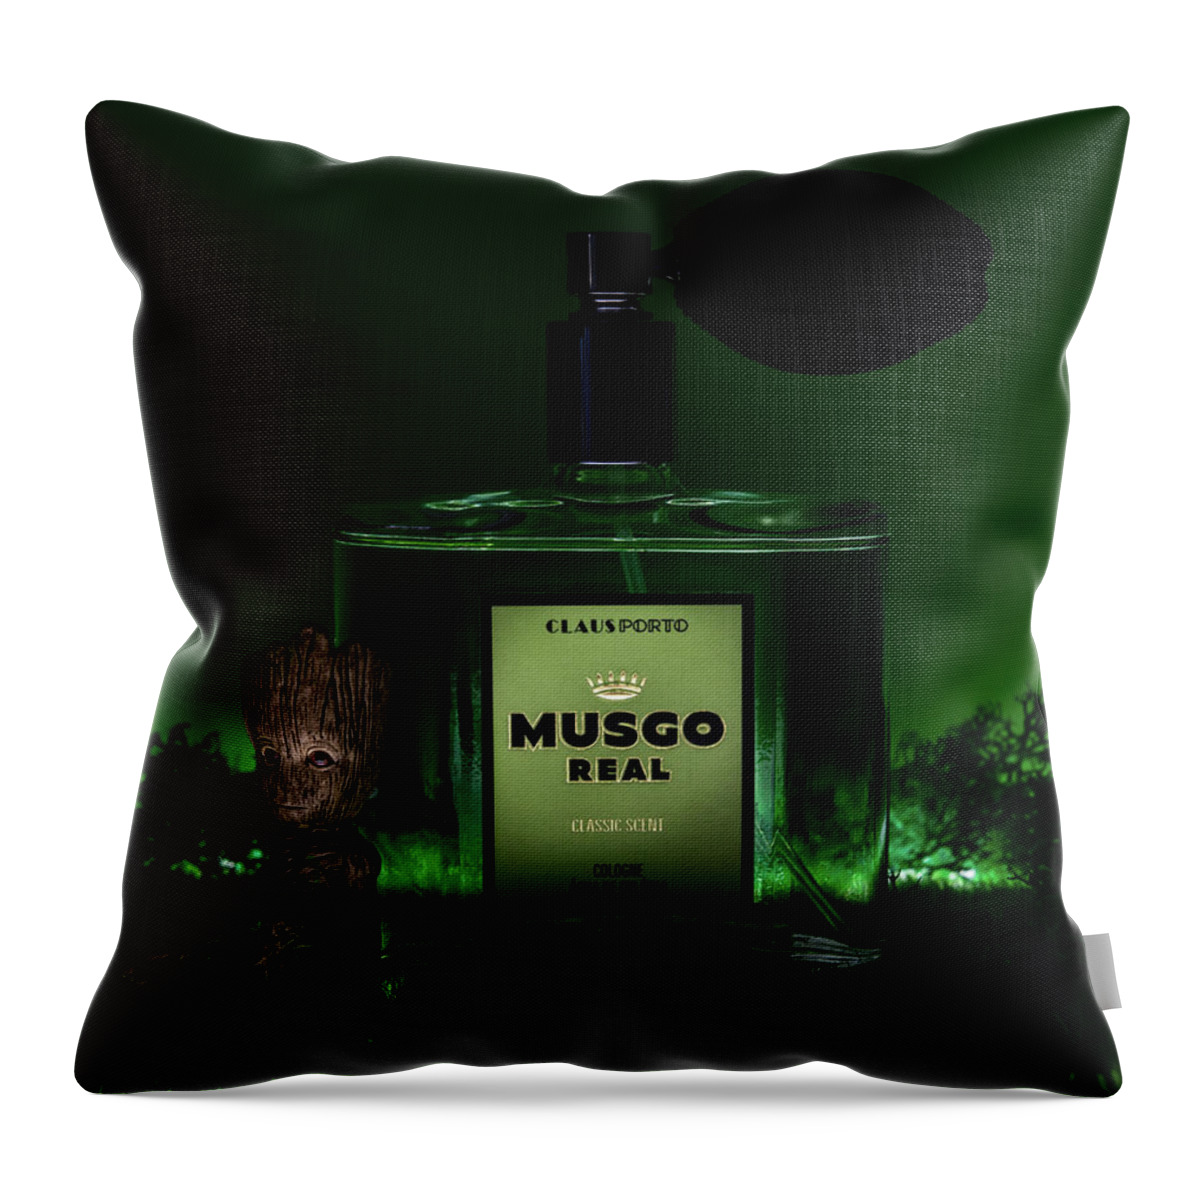 Musgo Real Vintage 1930 Throw Pillow by Paulo Viana - Pixels